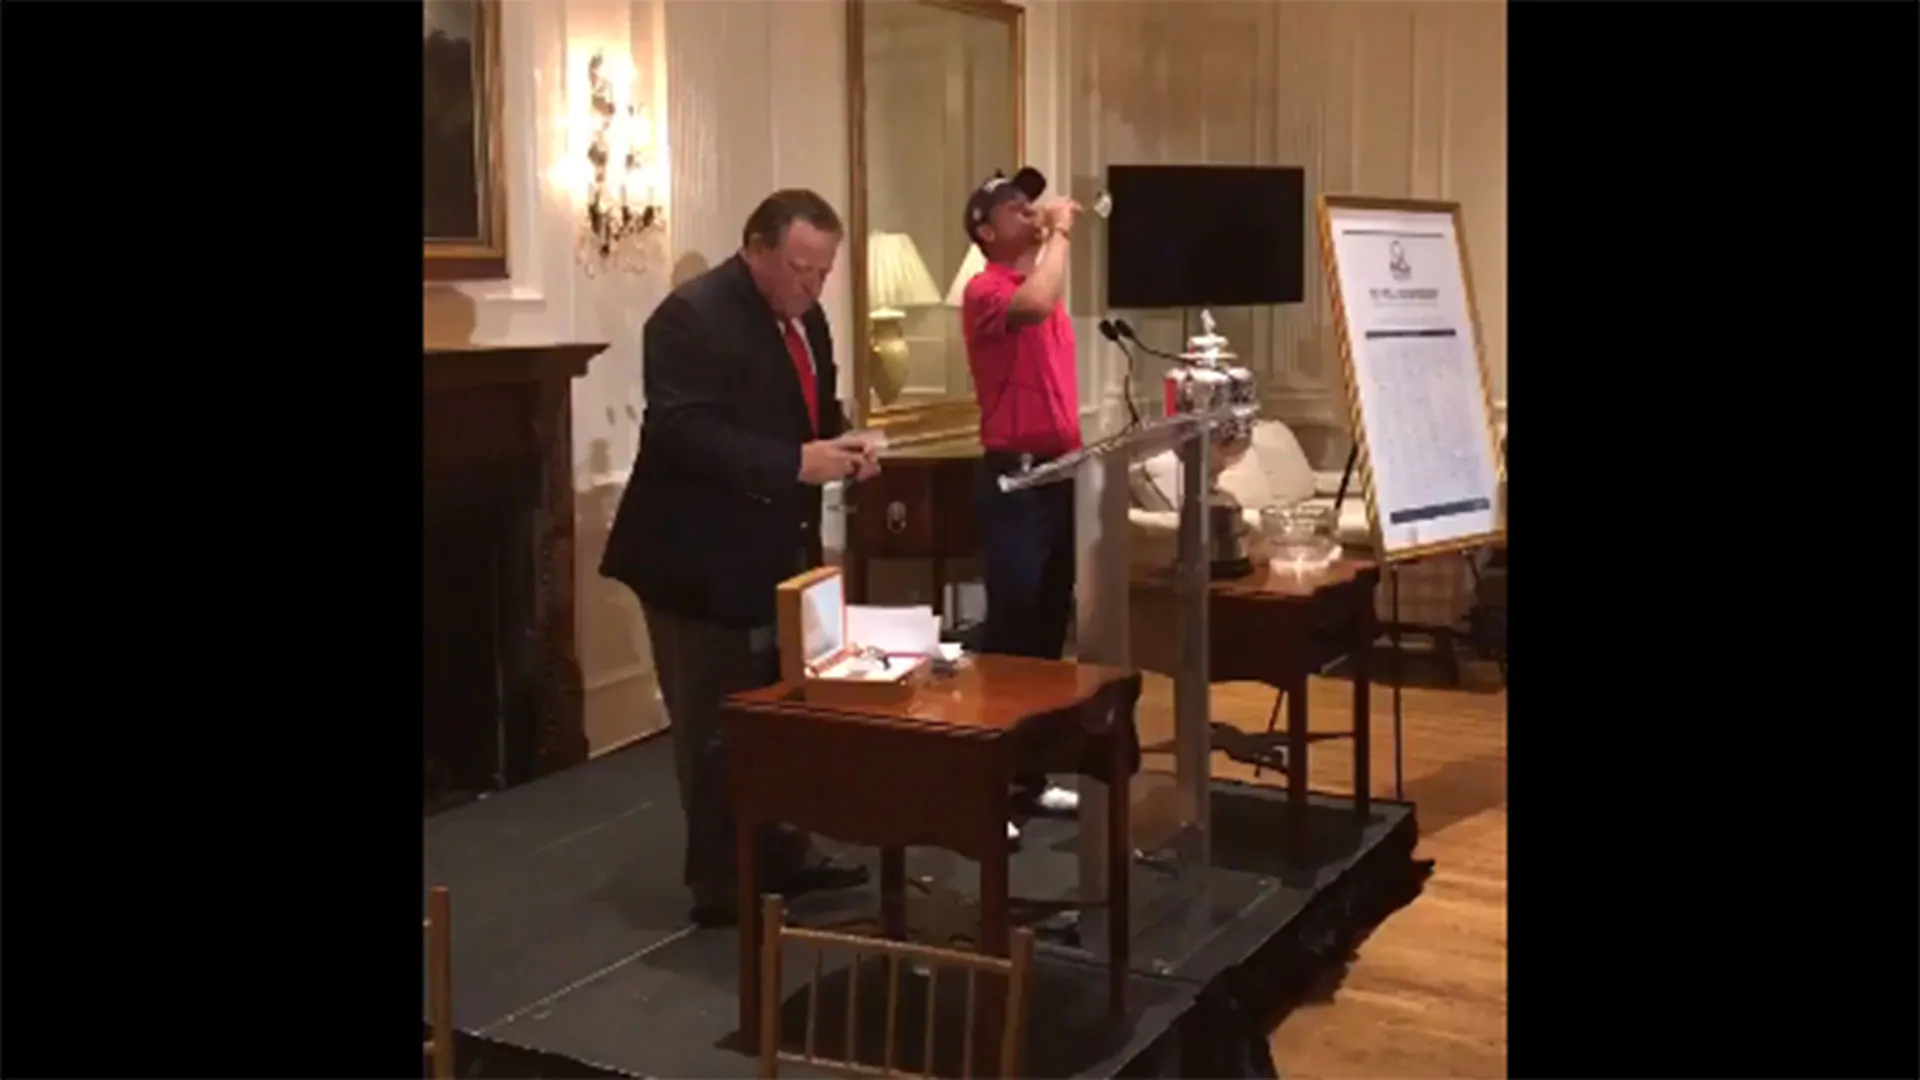 Watch: Thomas chugs champagne toast after PGA win